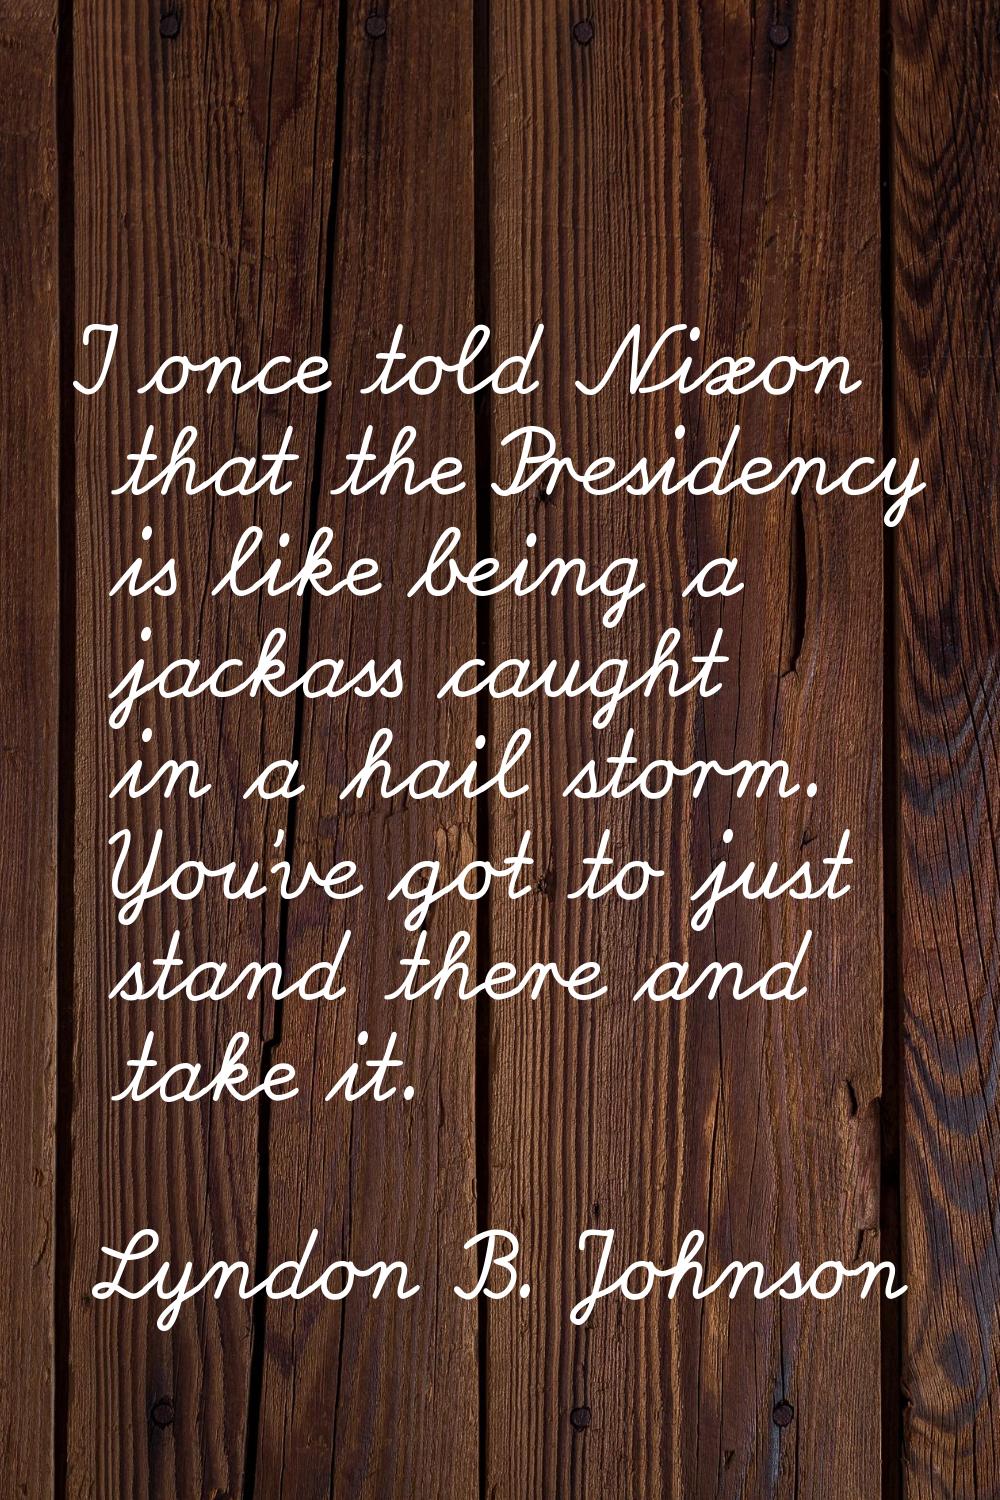 I once told Nixon that the Presidency is like being a jackass caught in a hail storm. You've got to